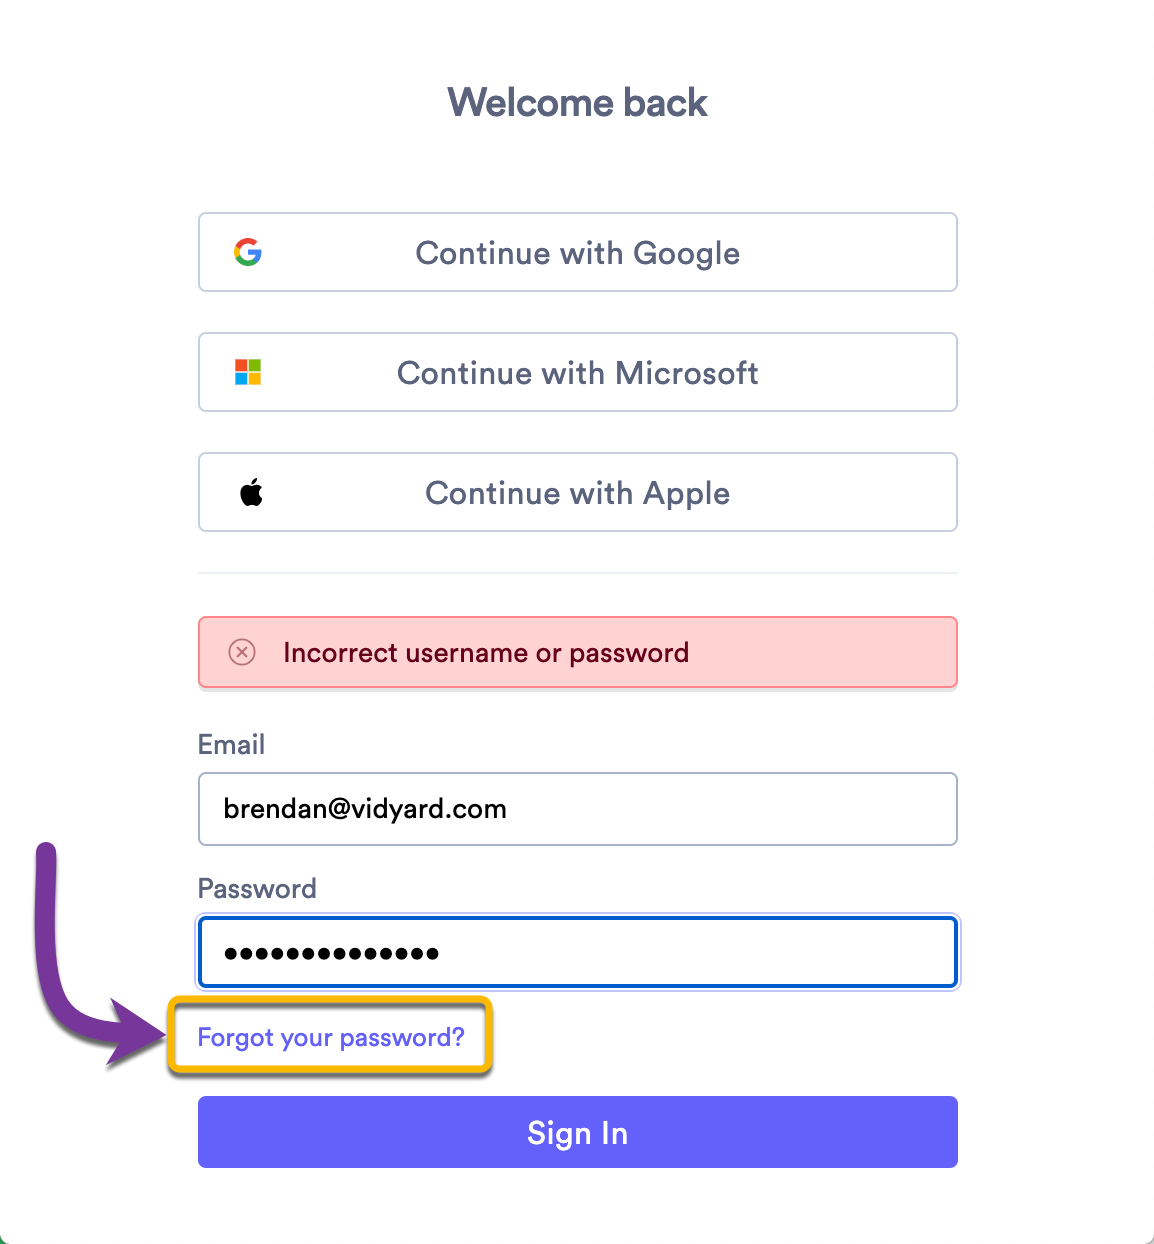 Selecting the Forgot your Password link on the sign-in page